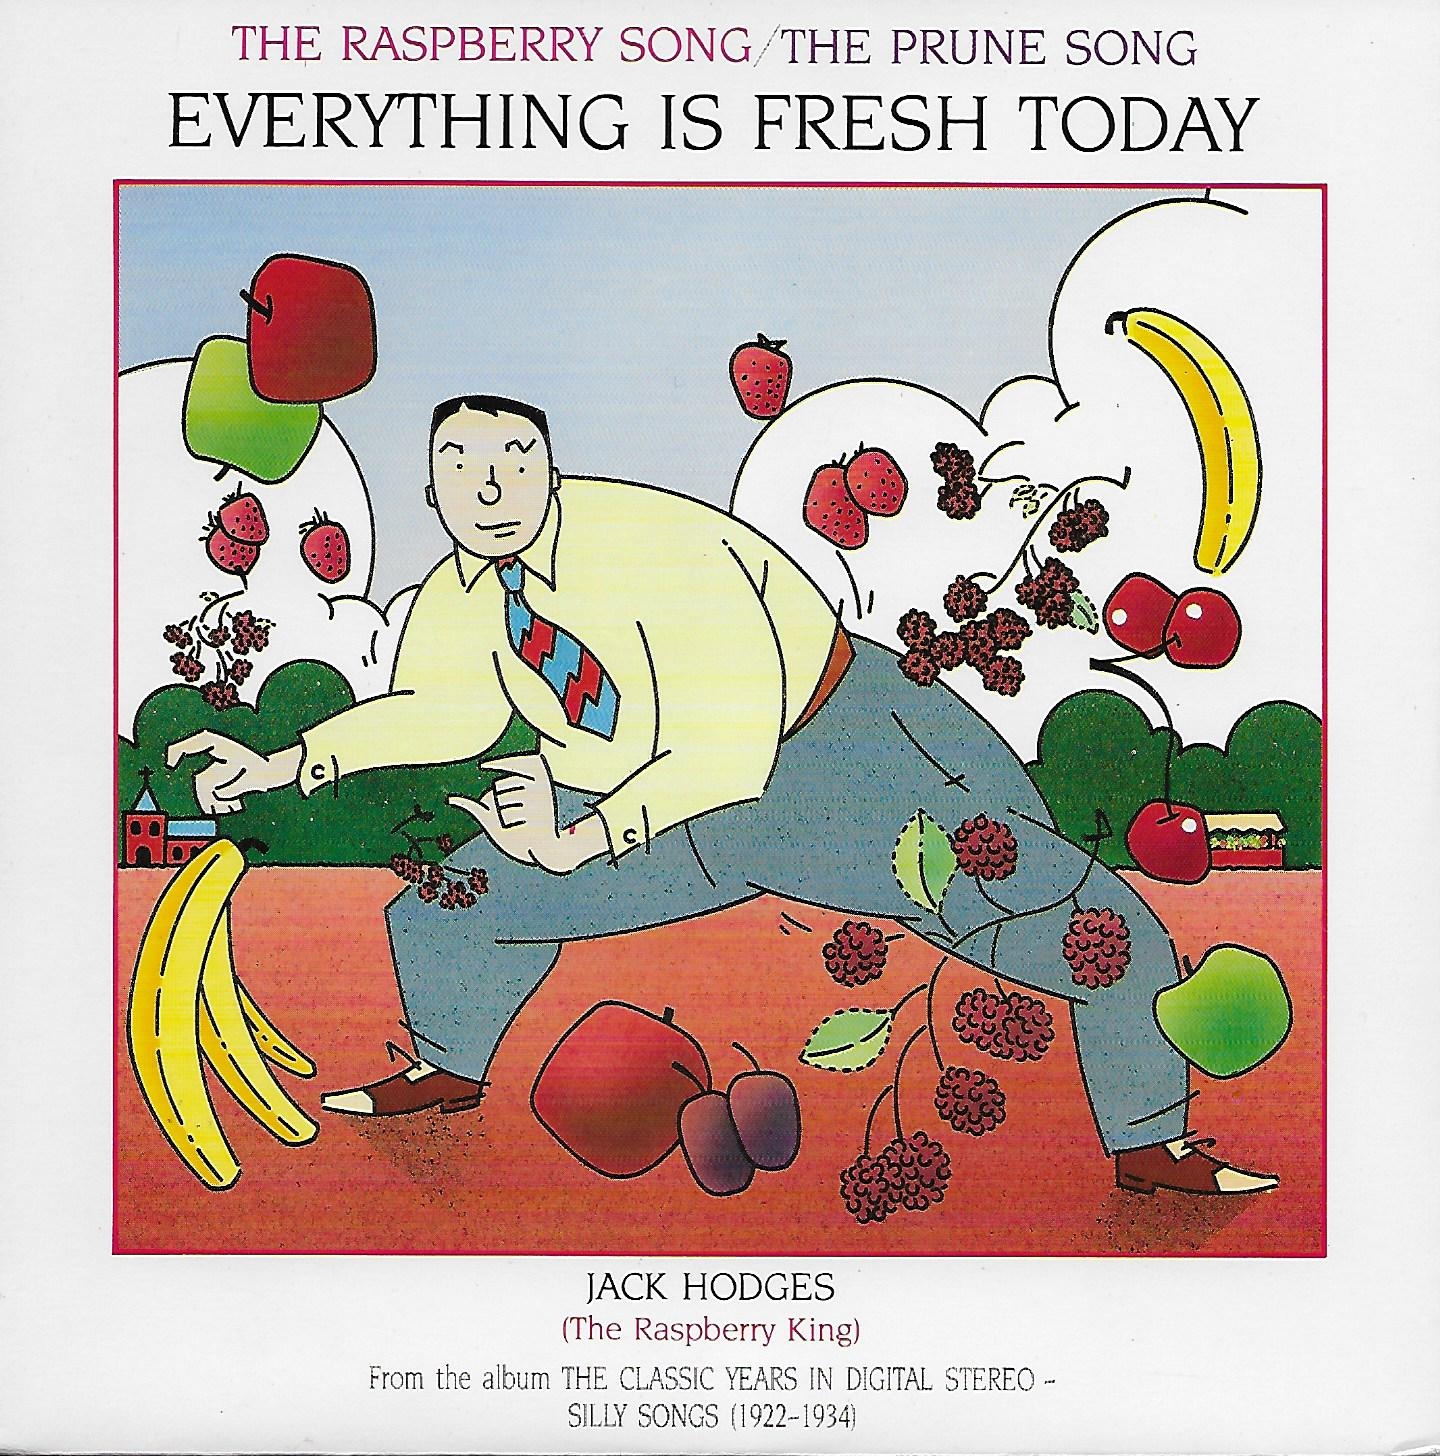 Picture of RESL 223 Everything is fresh today (The raspberry song) by artist Jack Hodges / Frank Crumit from the BBC records and Tapes library